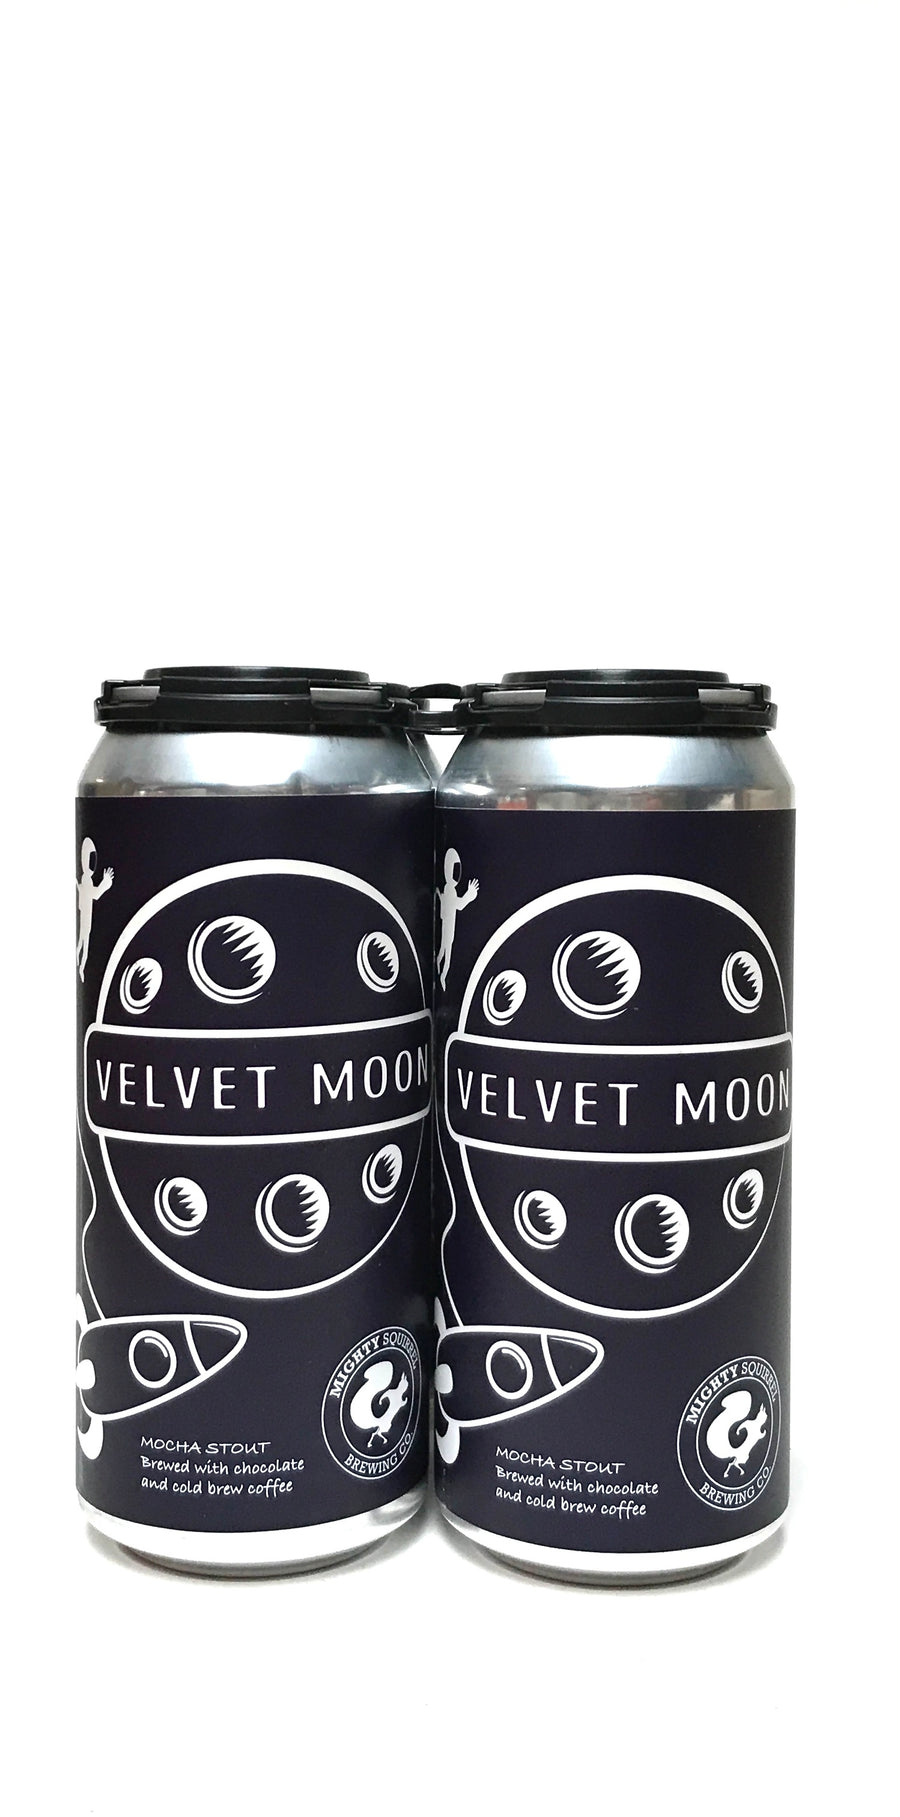 Mighty Squirrel Velvet Moon Mocha Stout 16oz Can 4-Pack